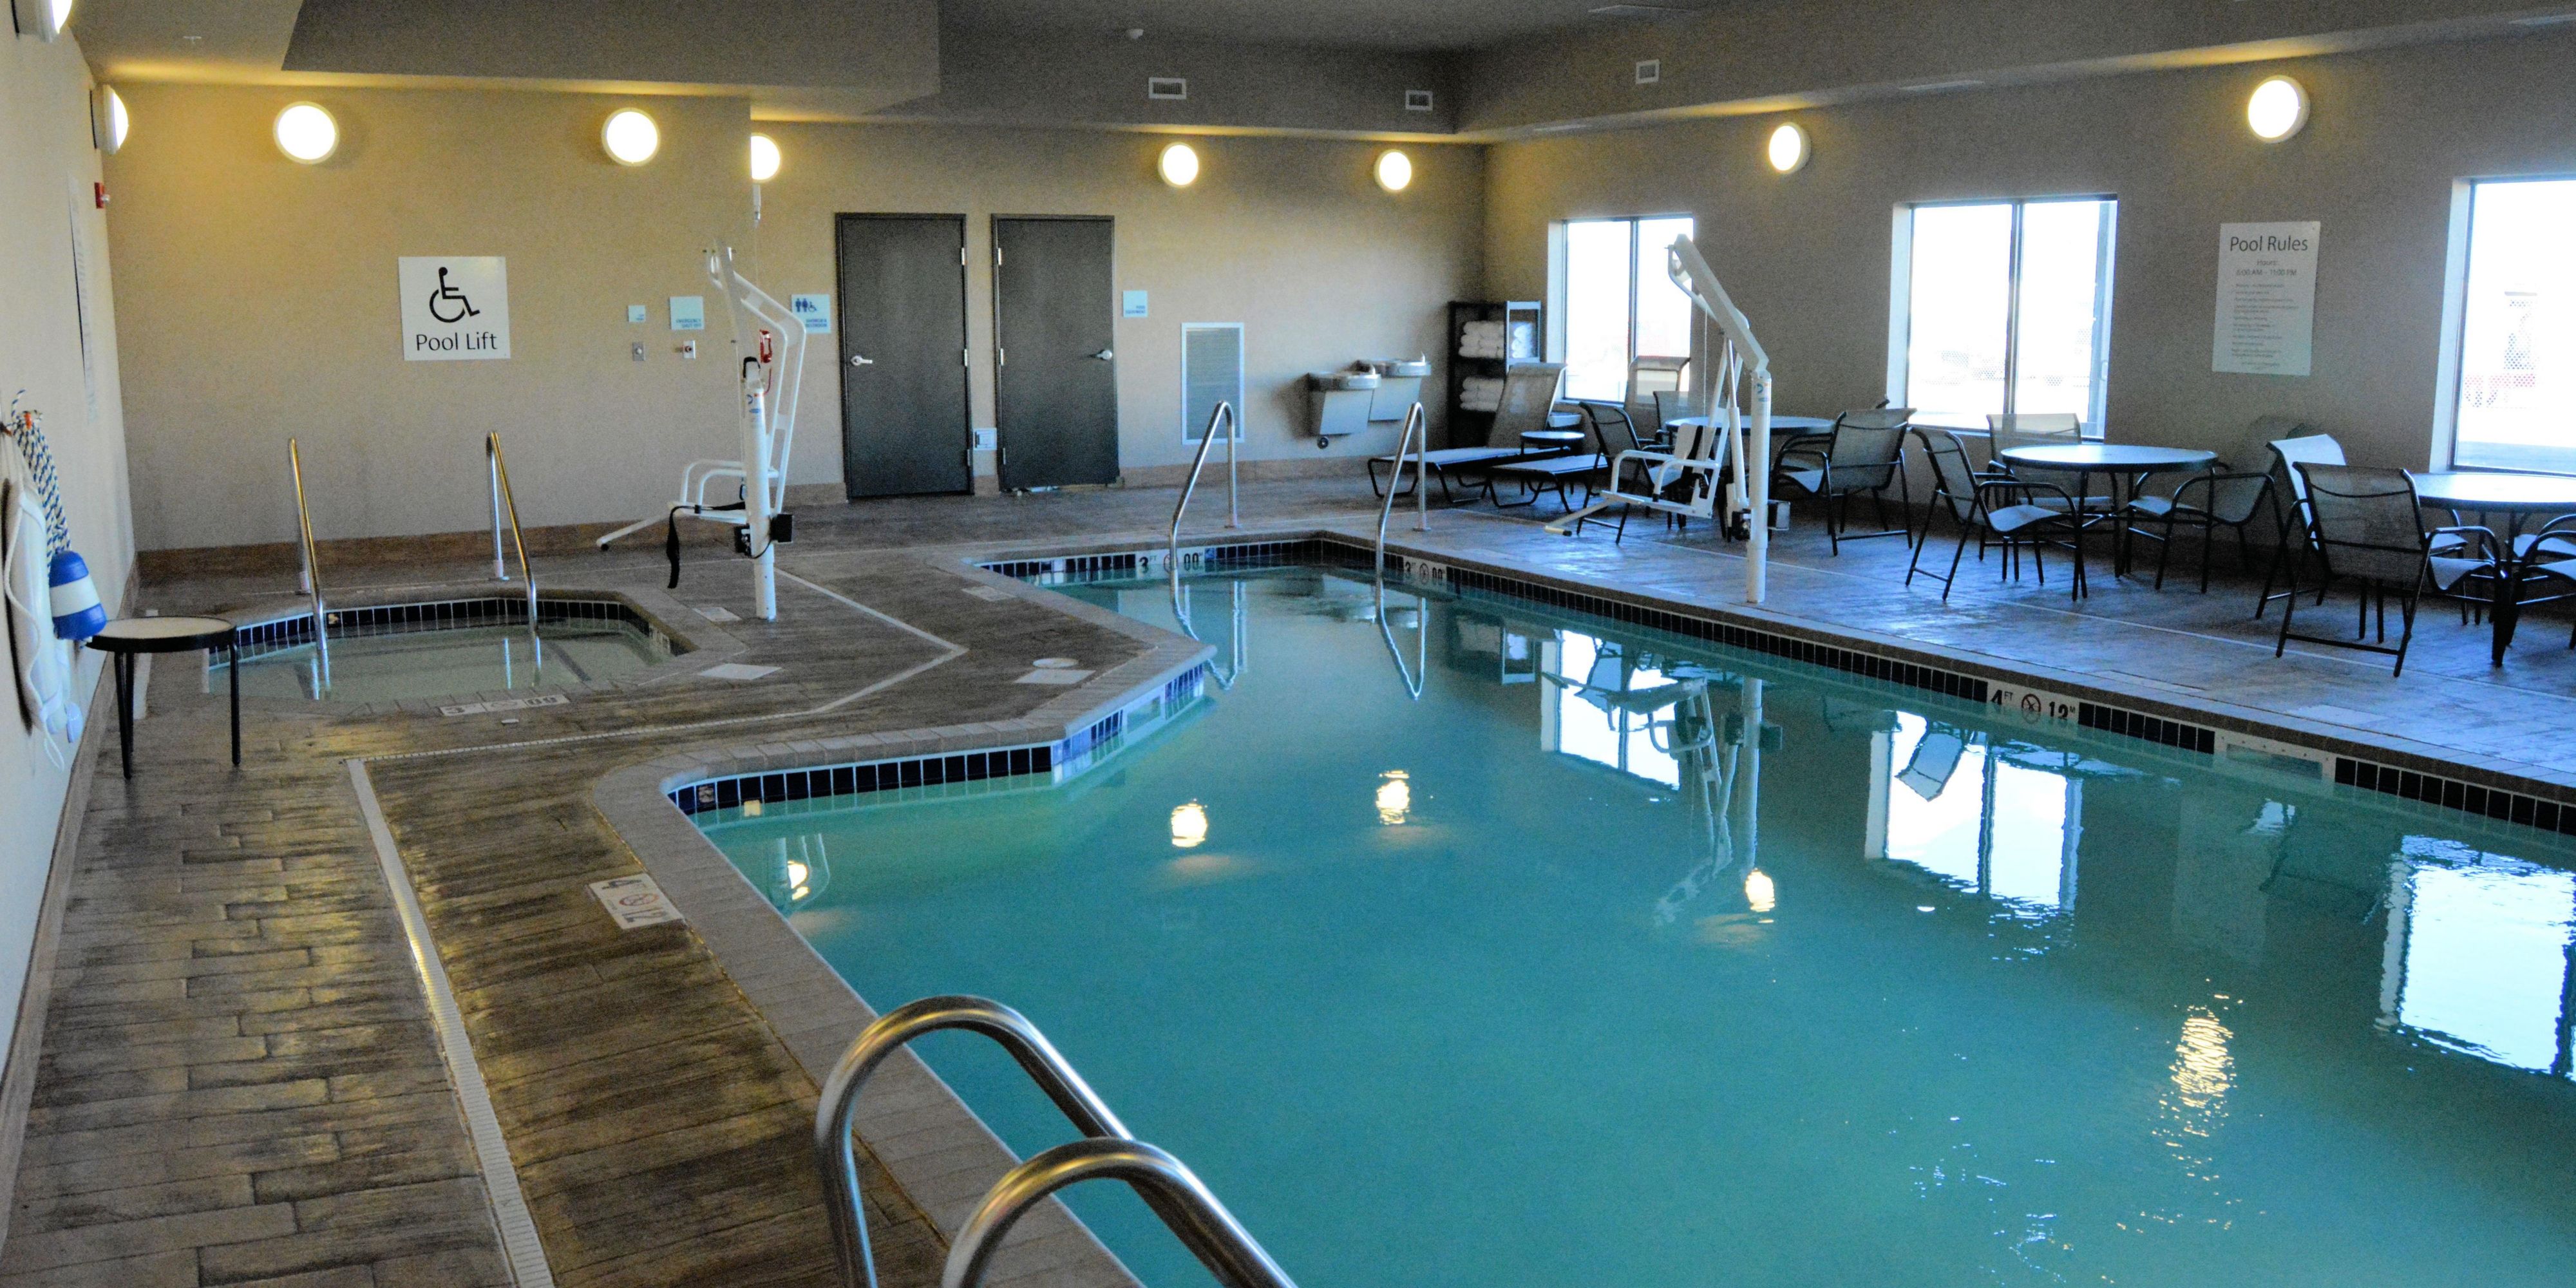 Rain or Shine, you can always take a dip at our indoor heated pool or relax and unwind in our whirlpool